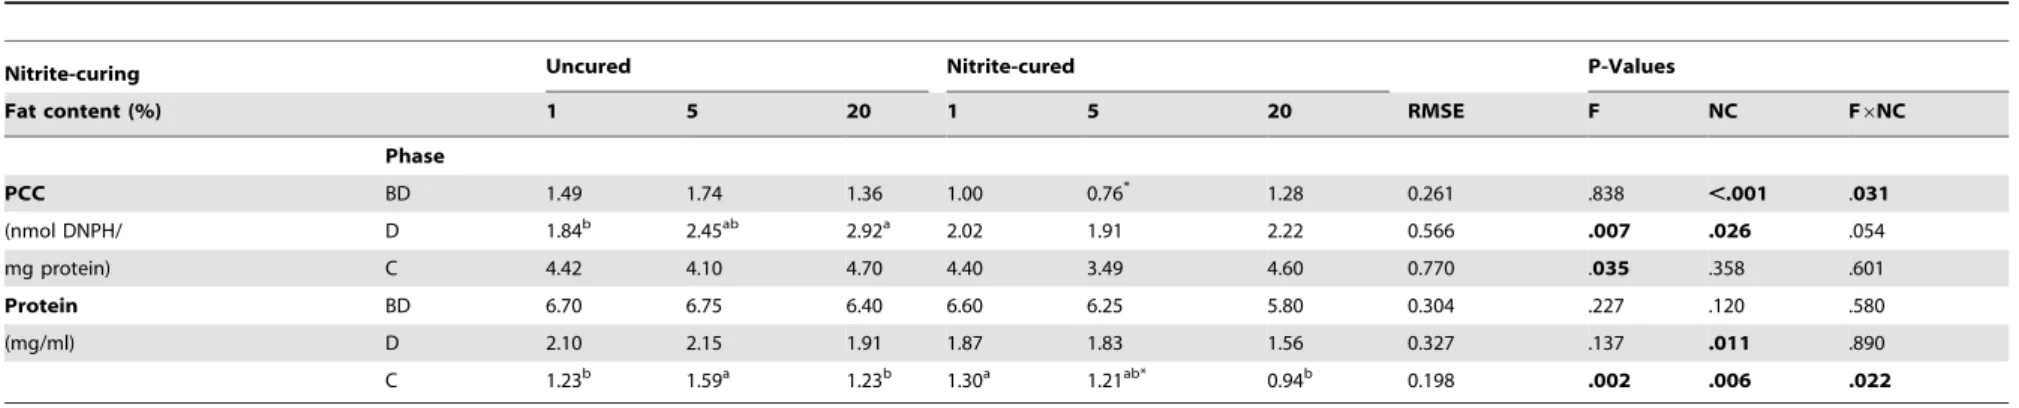 Table 4. Protein oxidation in uncured and nitrite-cured pork containing different amounts of fat (1, 5, 20%) before and after in vitro digestion.